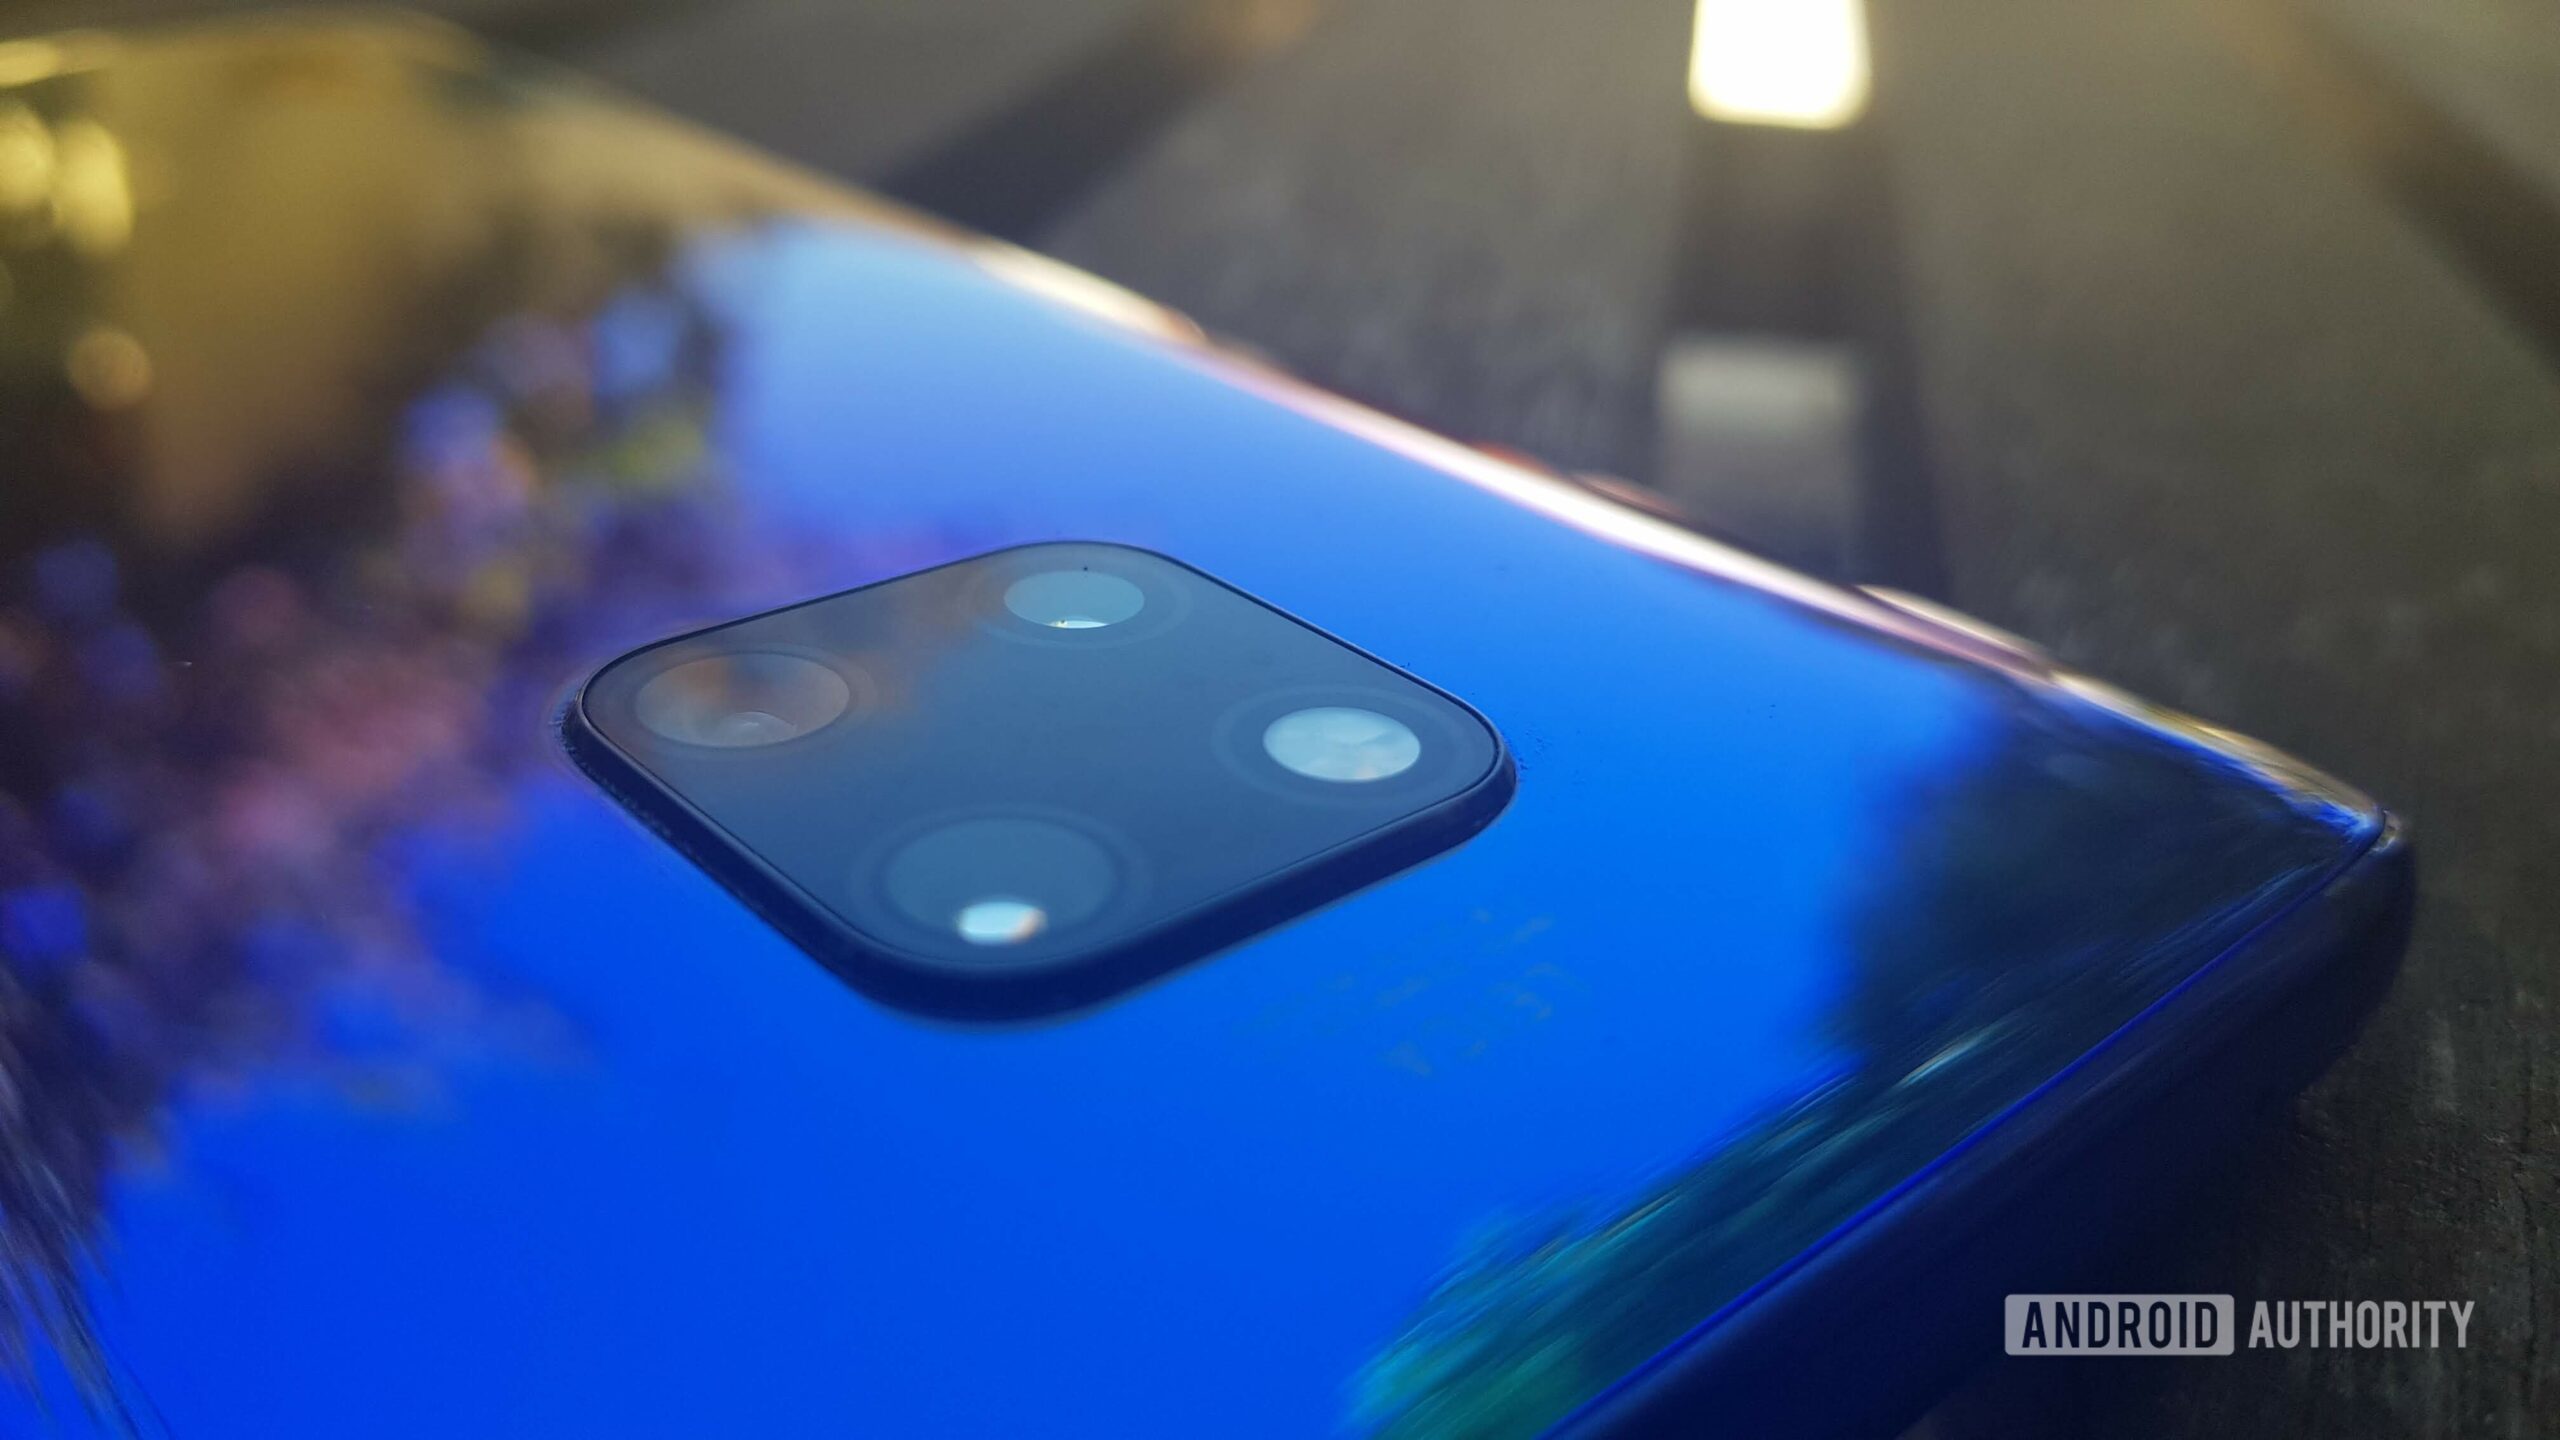 The back of the HUAWEI Mate 20 Pro, showing a camera bump.